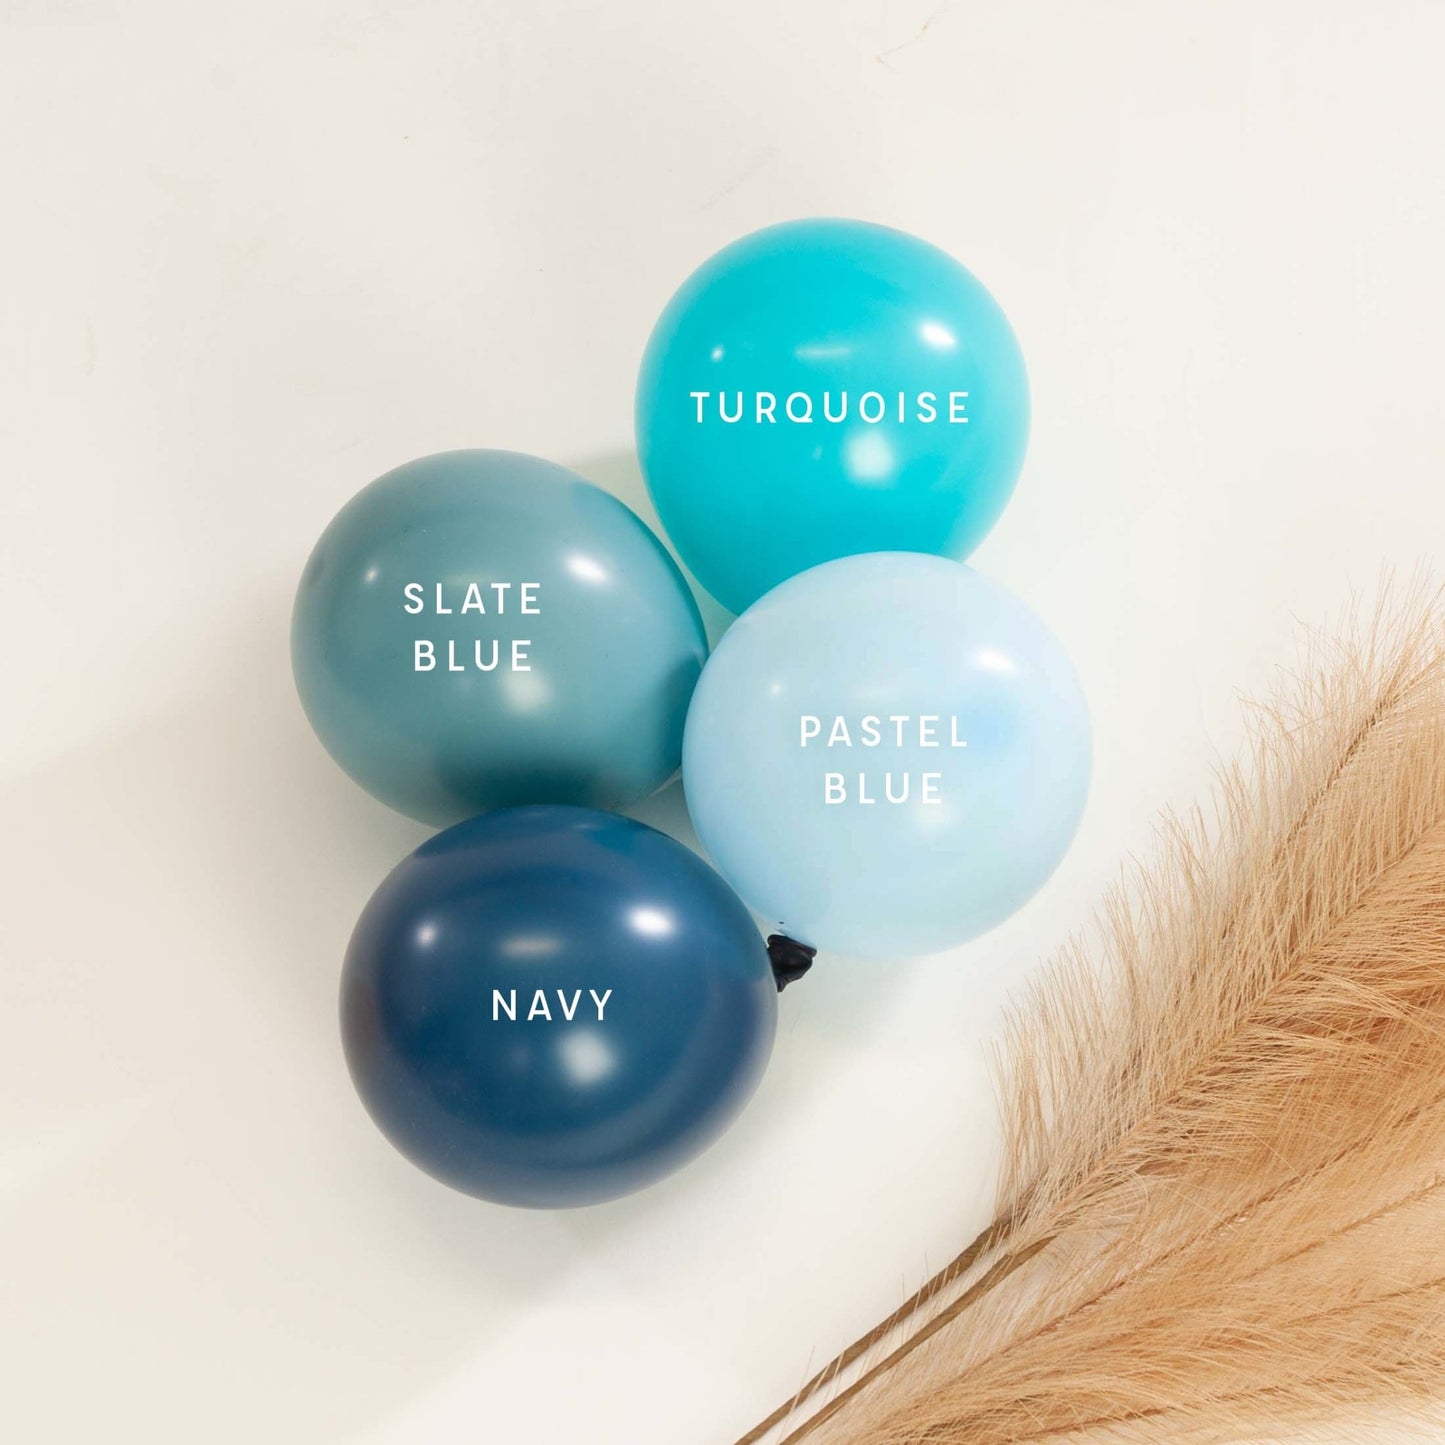 Premium Slate Blue Latex Balloon Packs (5", 11”, 16”, 24”, and 36”) - Ellie's Party Supply